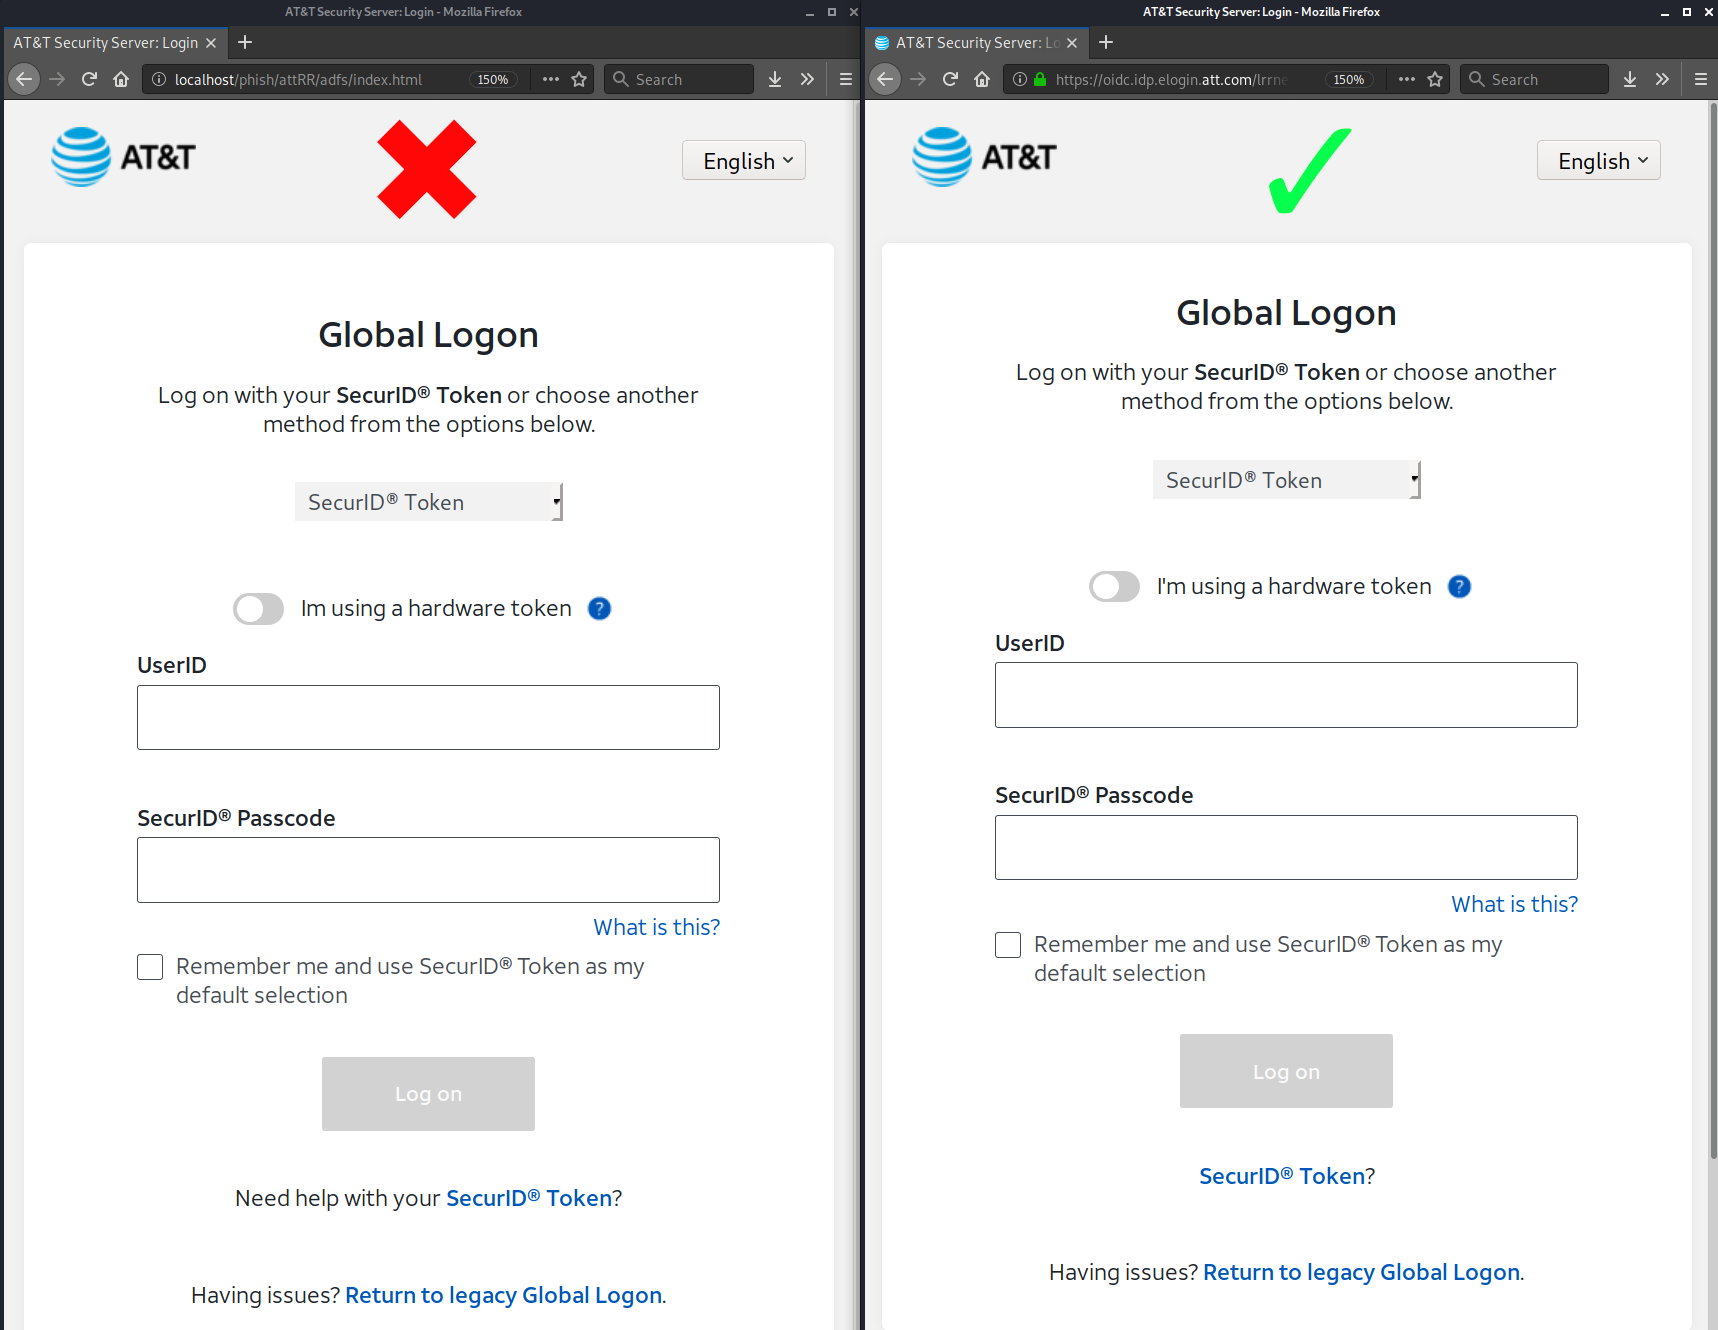 A side-by-side view of the phishing page